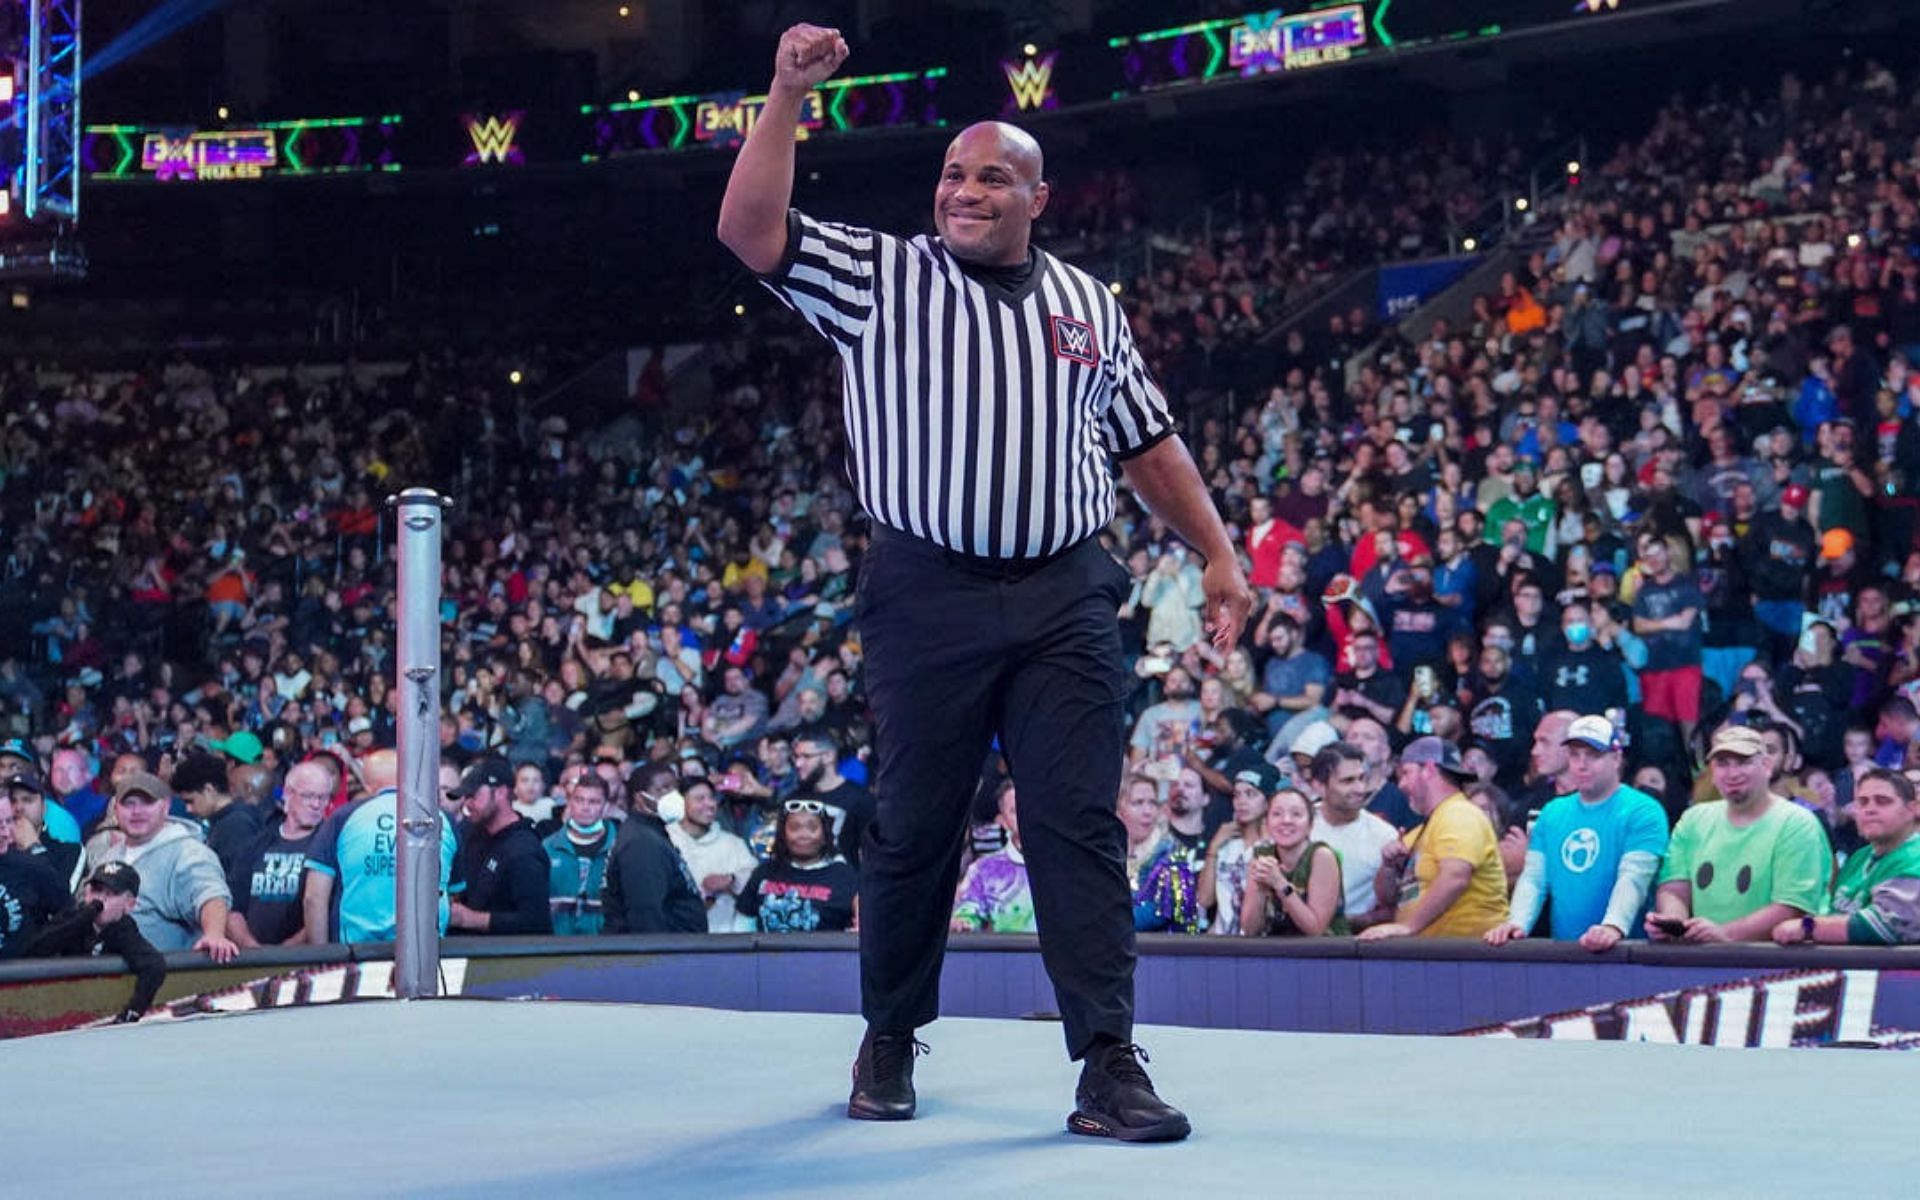 Daniel Cormier as guest referee at WWE Extreme Rules in October 2022 [Image courtesy: @WONF4W (Twitter)]